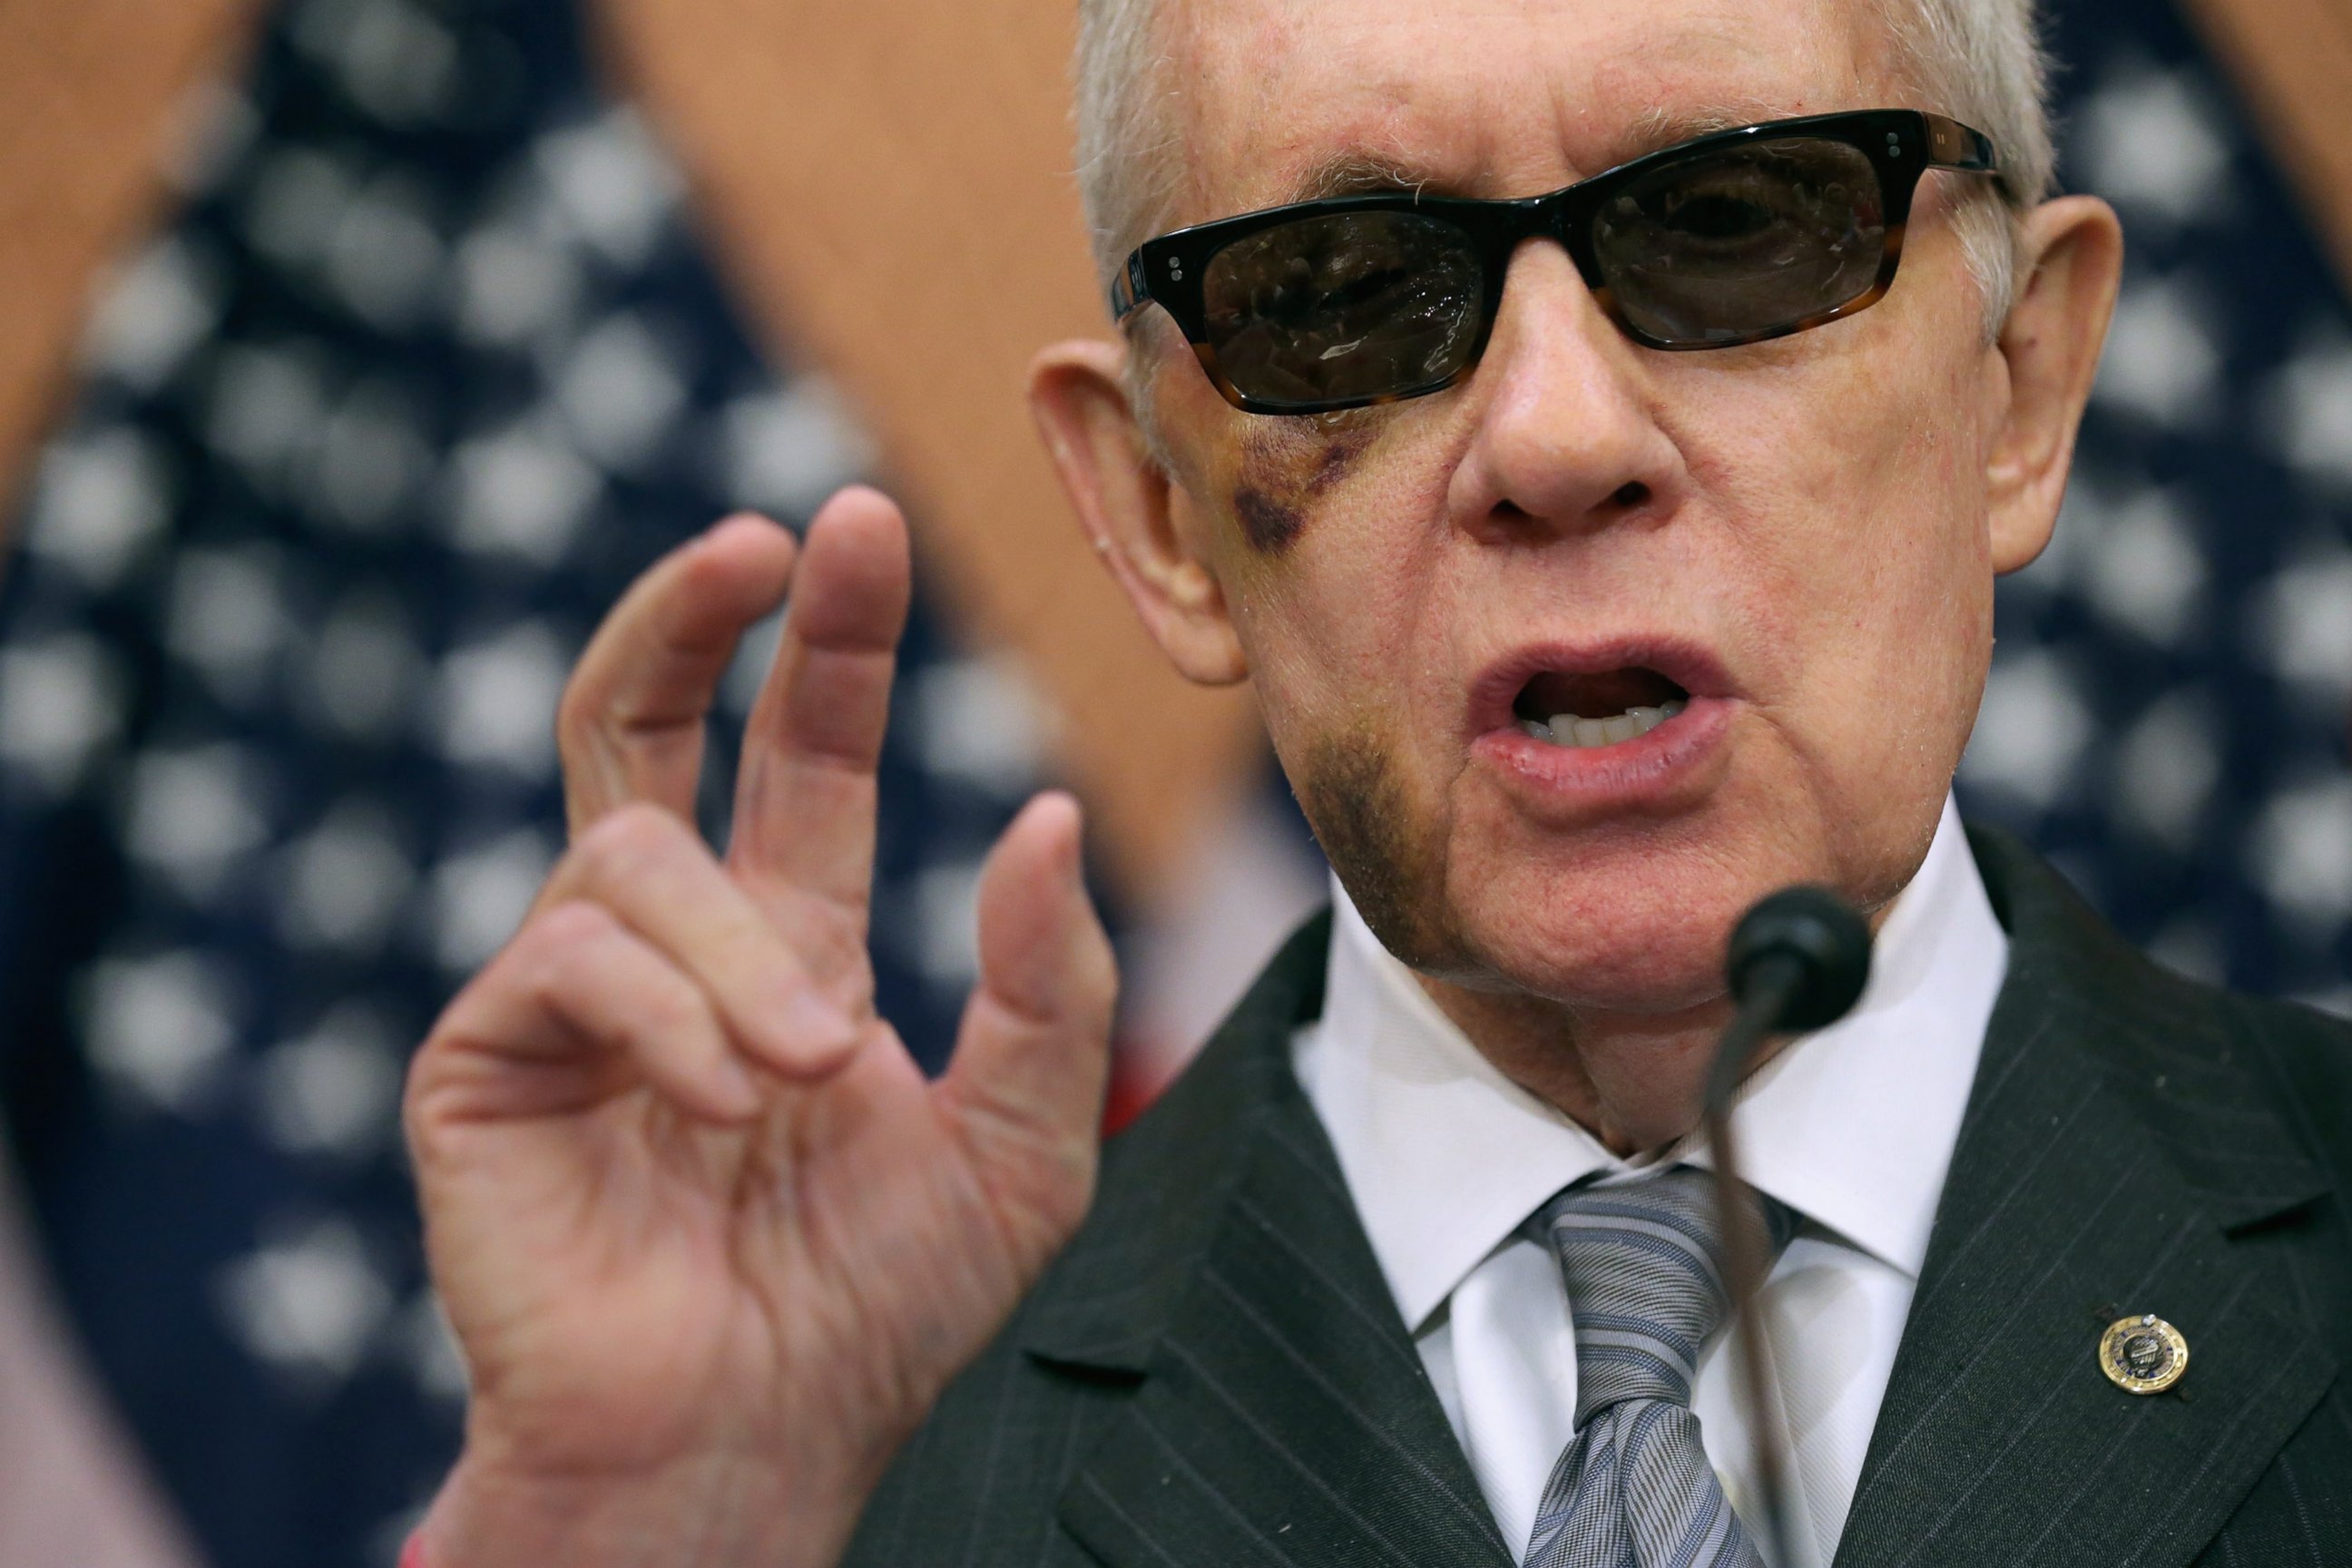 PHOTO: Senate Minority Leader Harry Reid accuses Republican Senate leaders of manufacturing the possible shutdown of the Department of Homeland Security during a news conference at the U.S. Capitol, Feb. 24, 2015 in Washington, DC.